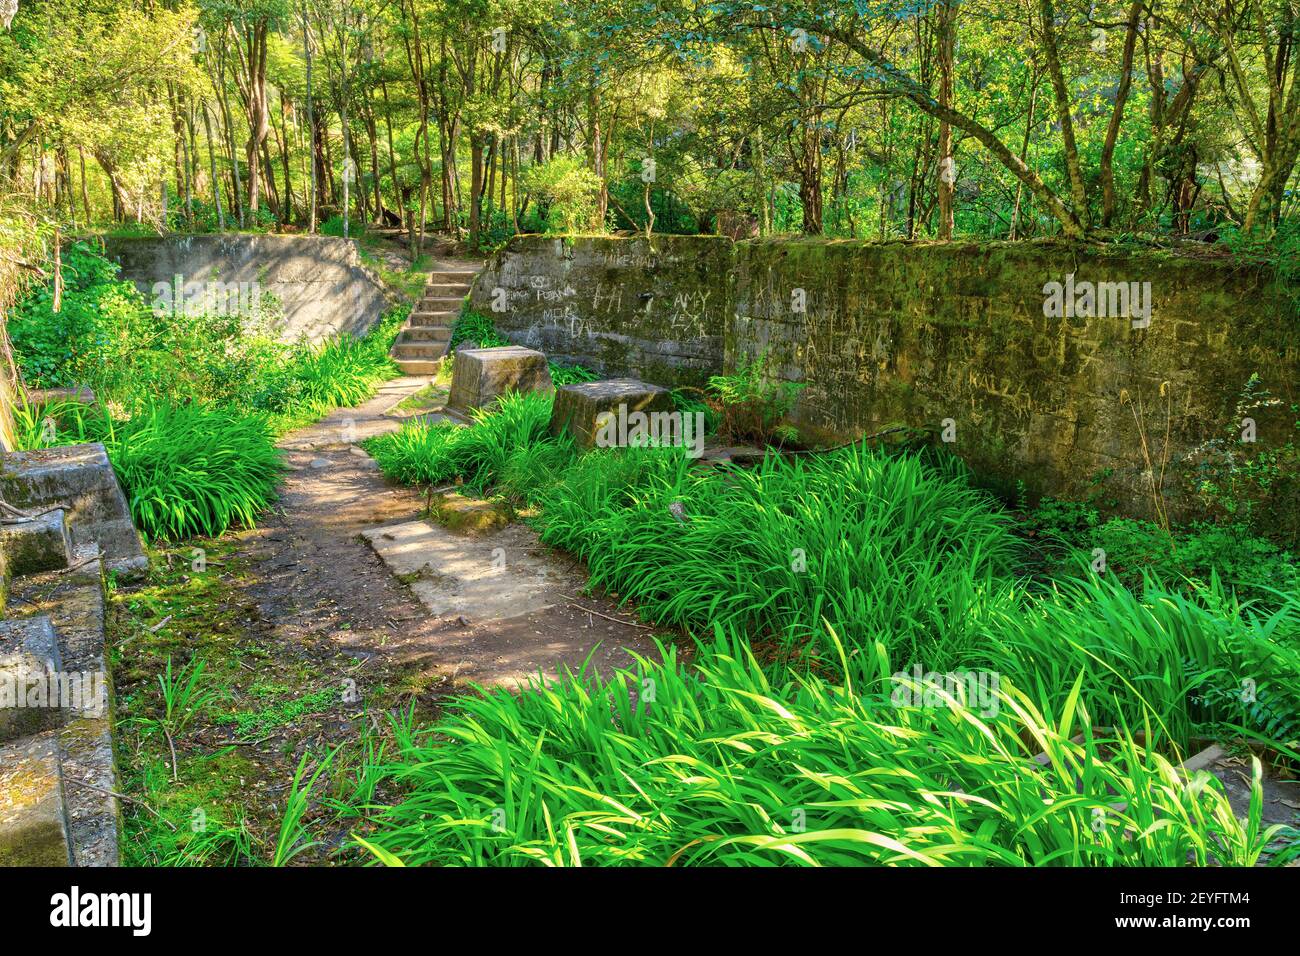 The overgrown ruins of old buildings in the forest. This was a cyanide bath used for extracting gold from ore in the Karangahake Gorge, New Zealand Stock Photo